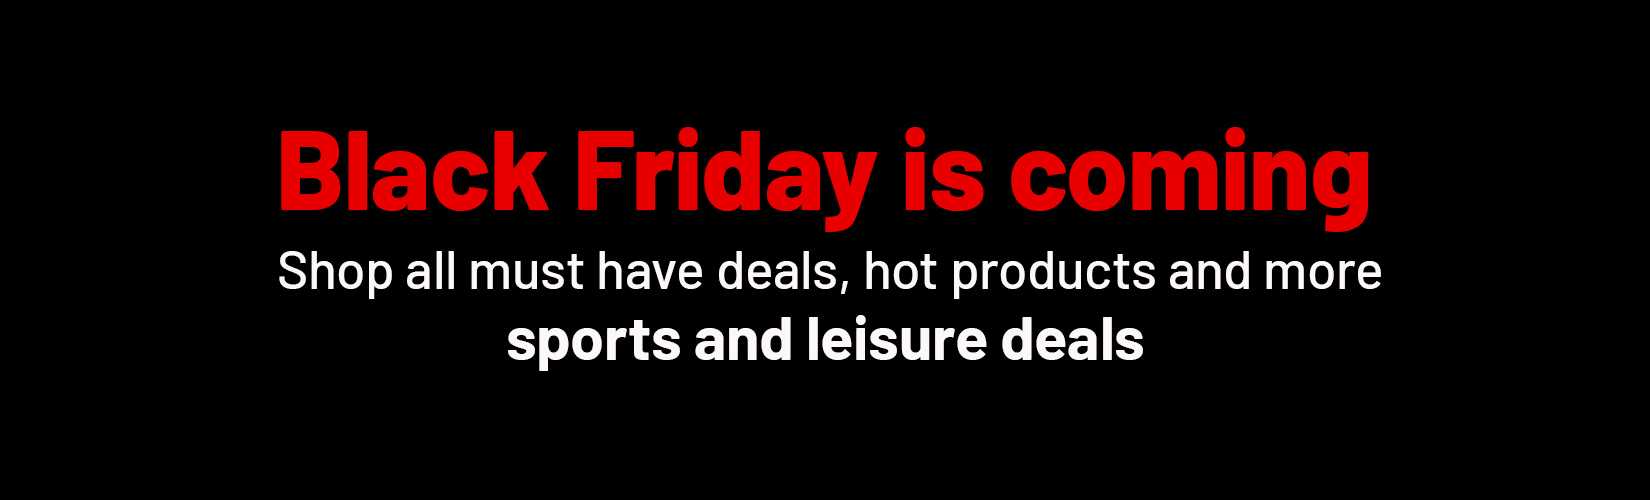 Black Friday is coming. Shop all must have deals, hot products and more sports and leisure deals.